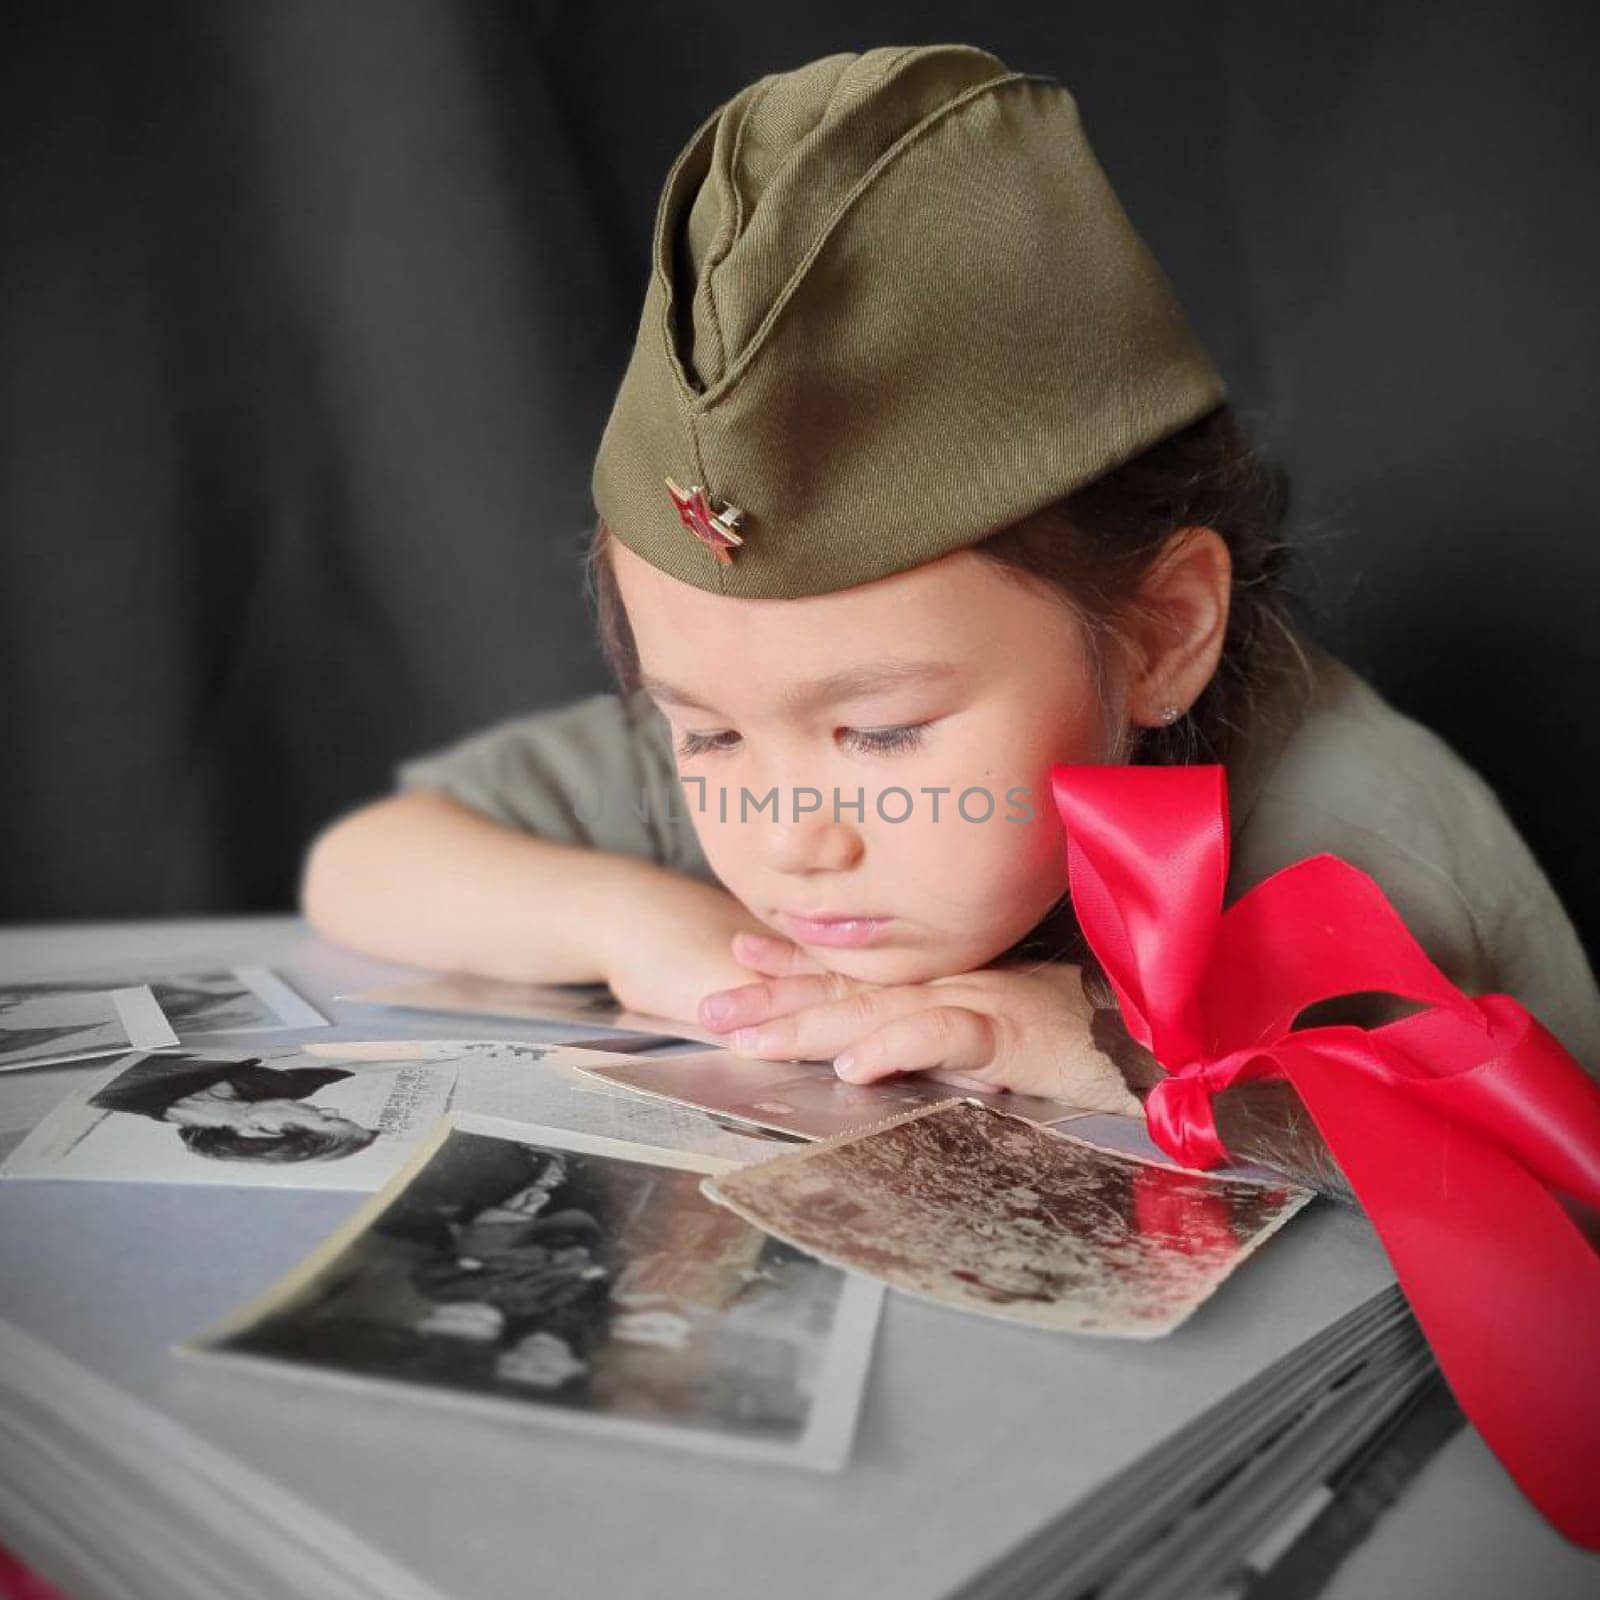 A little girl in a military uniform with two pigtails and red bows is looking at an album with photographs. Portrait photo for Victory Day. 9th May. High quality photo